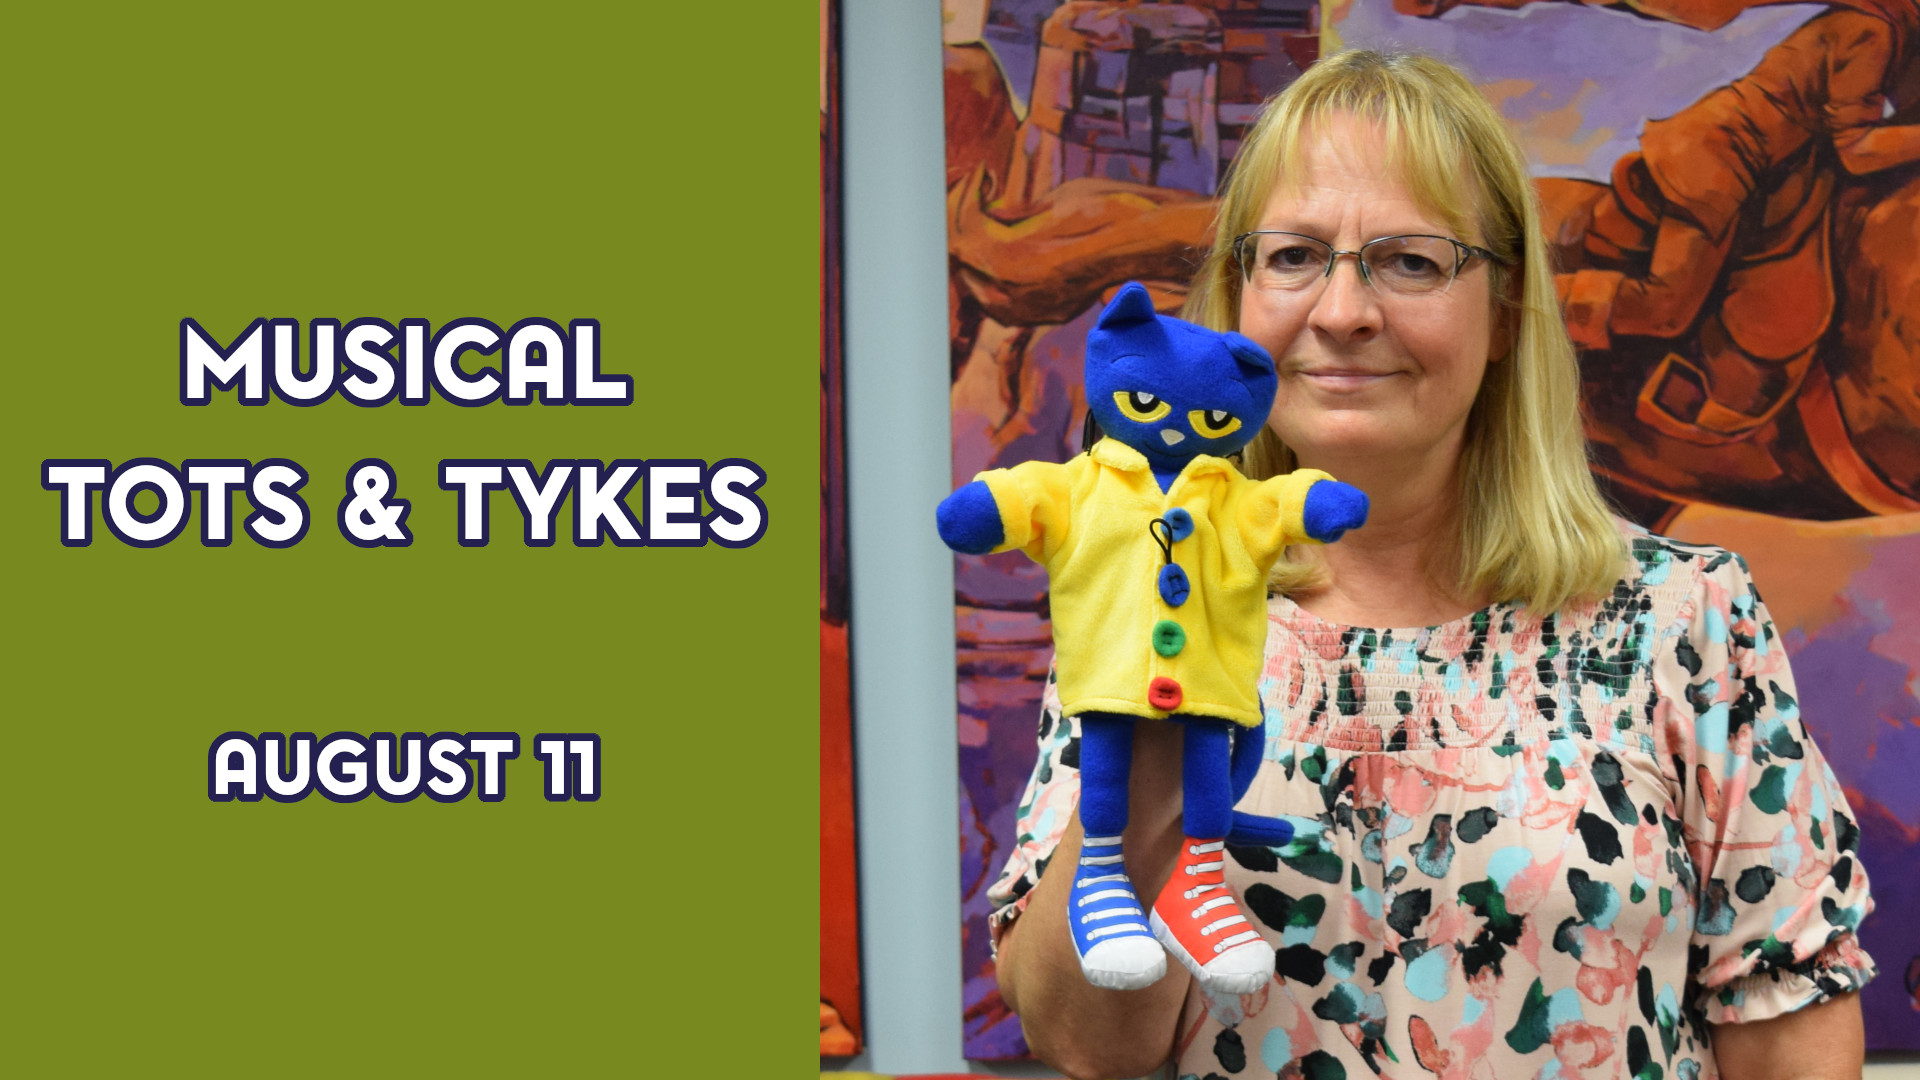 A woman holds a Pete the Cat puppet next to the text "Musical Tots & Tykes August 11"